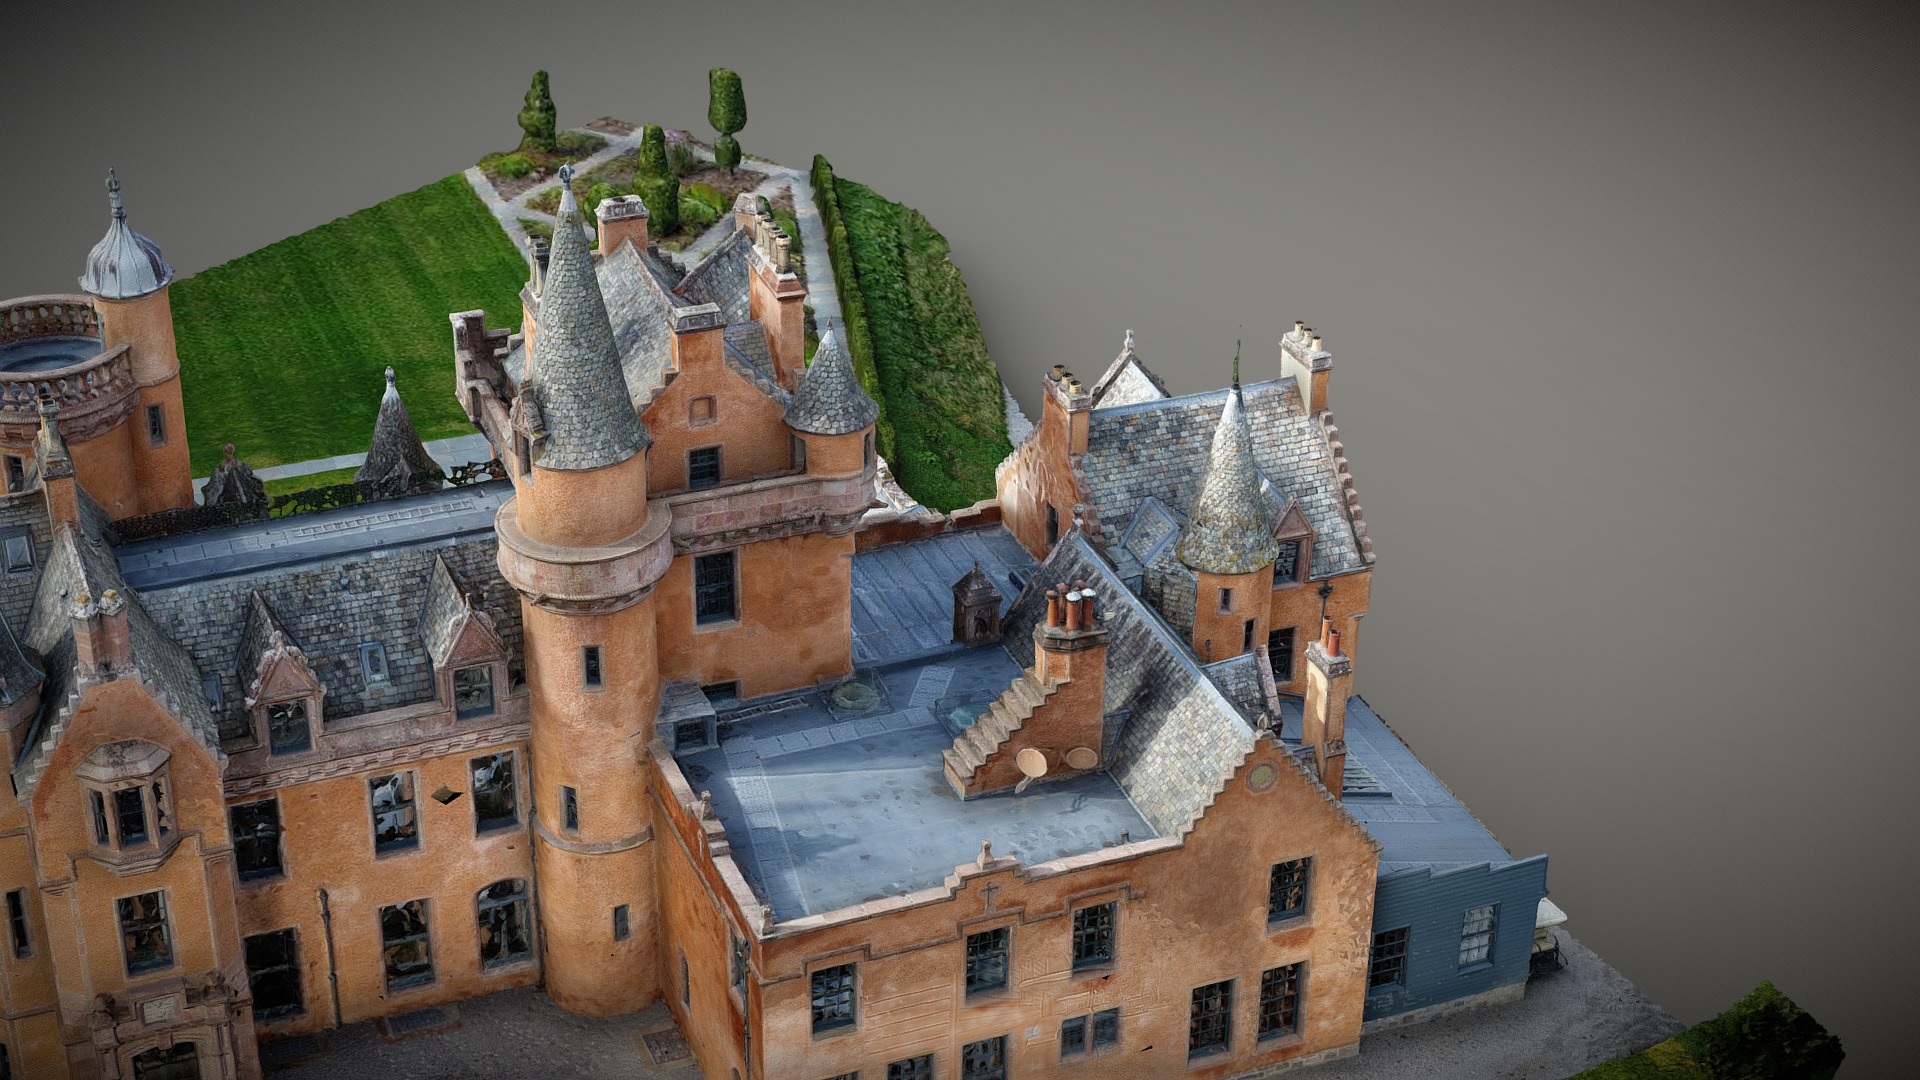 3D model Aldourie Castle Scotland 3D model from drone - This is a 3D model of the Aldourie Castle Scotland 3D model from drone. The 3D model is about a castle with a green roof.